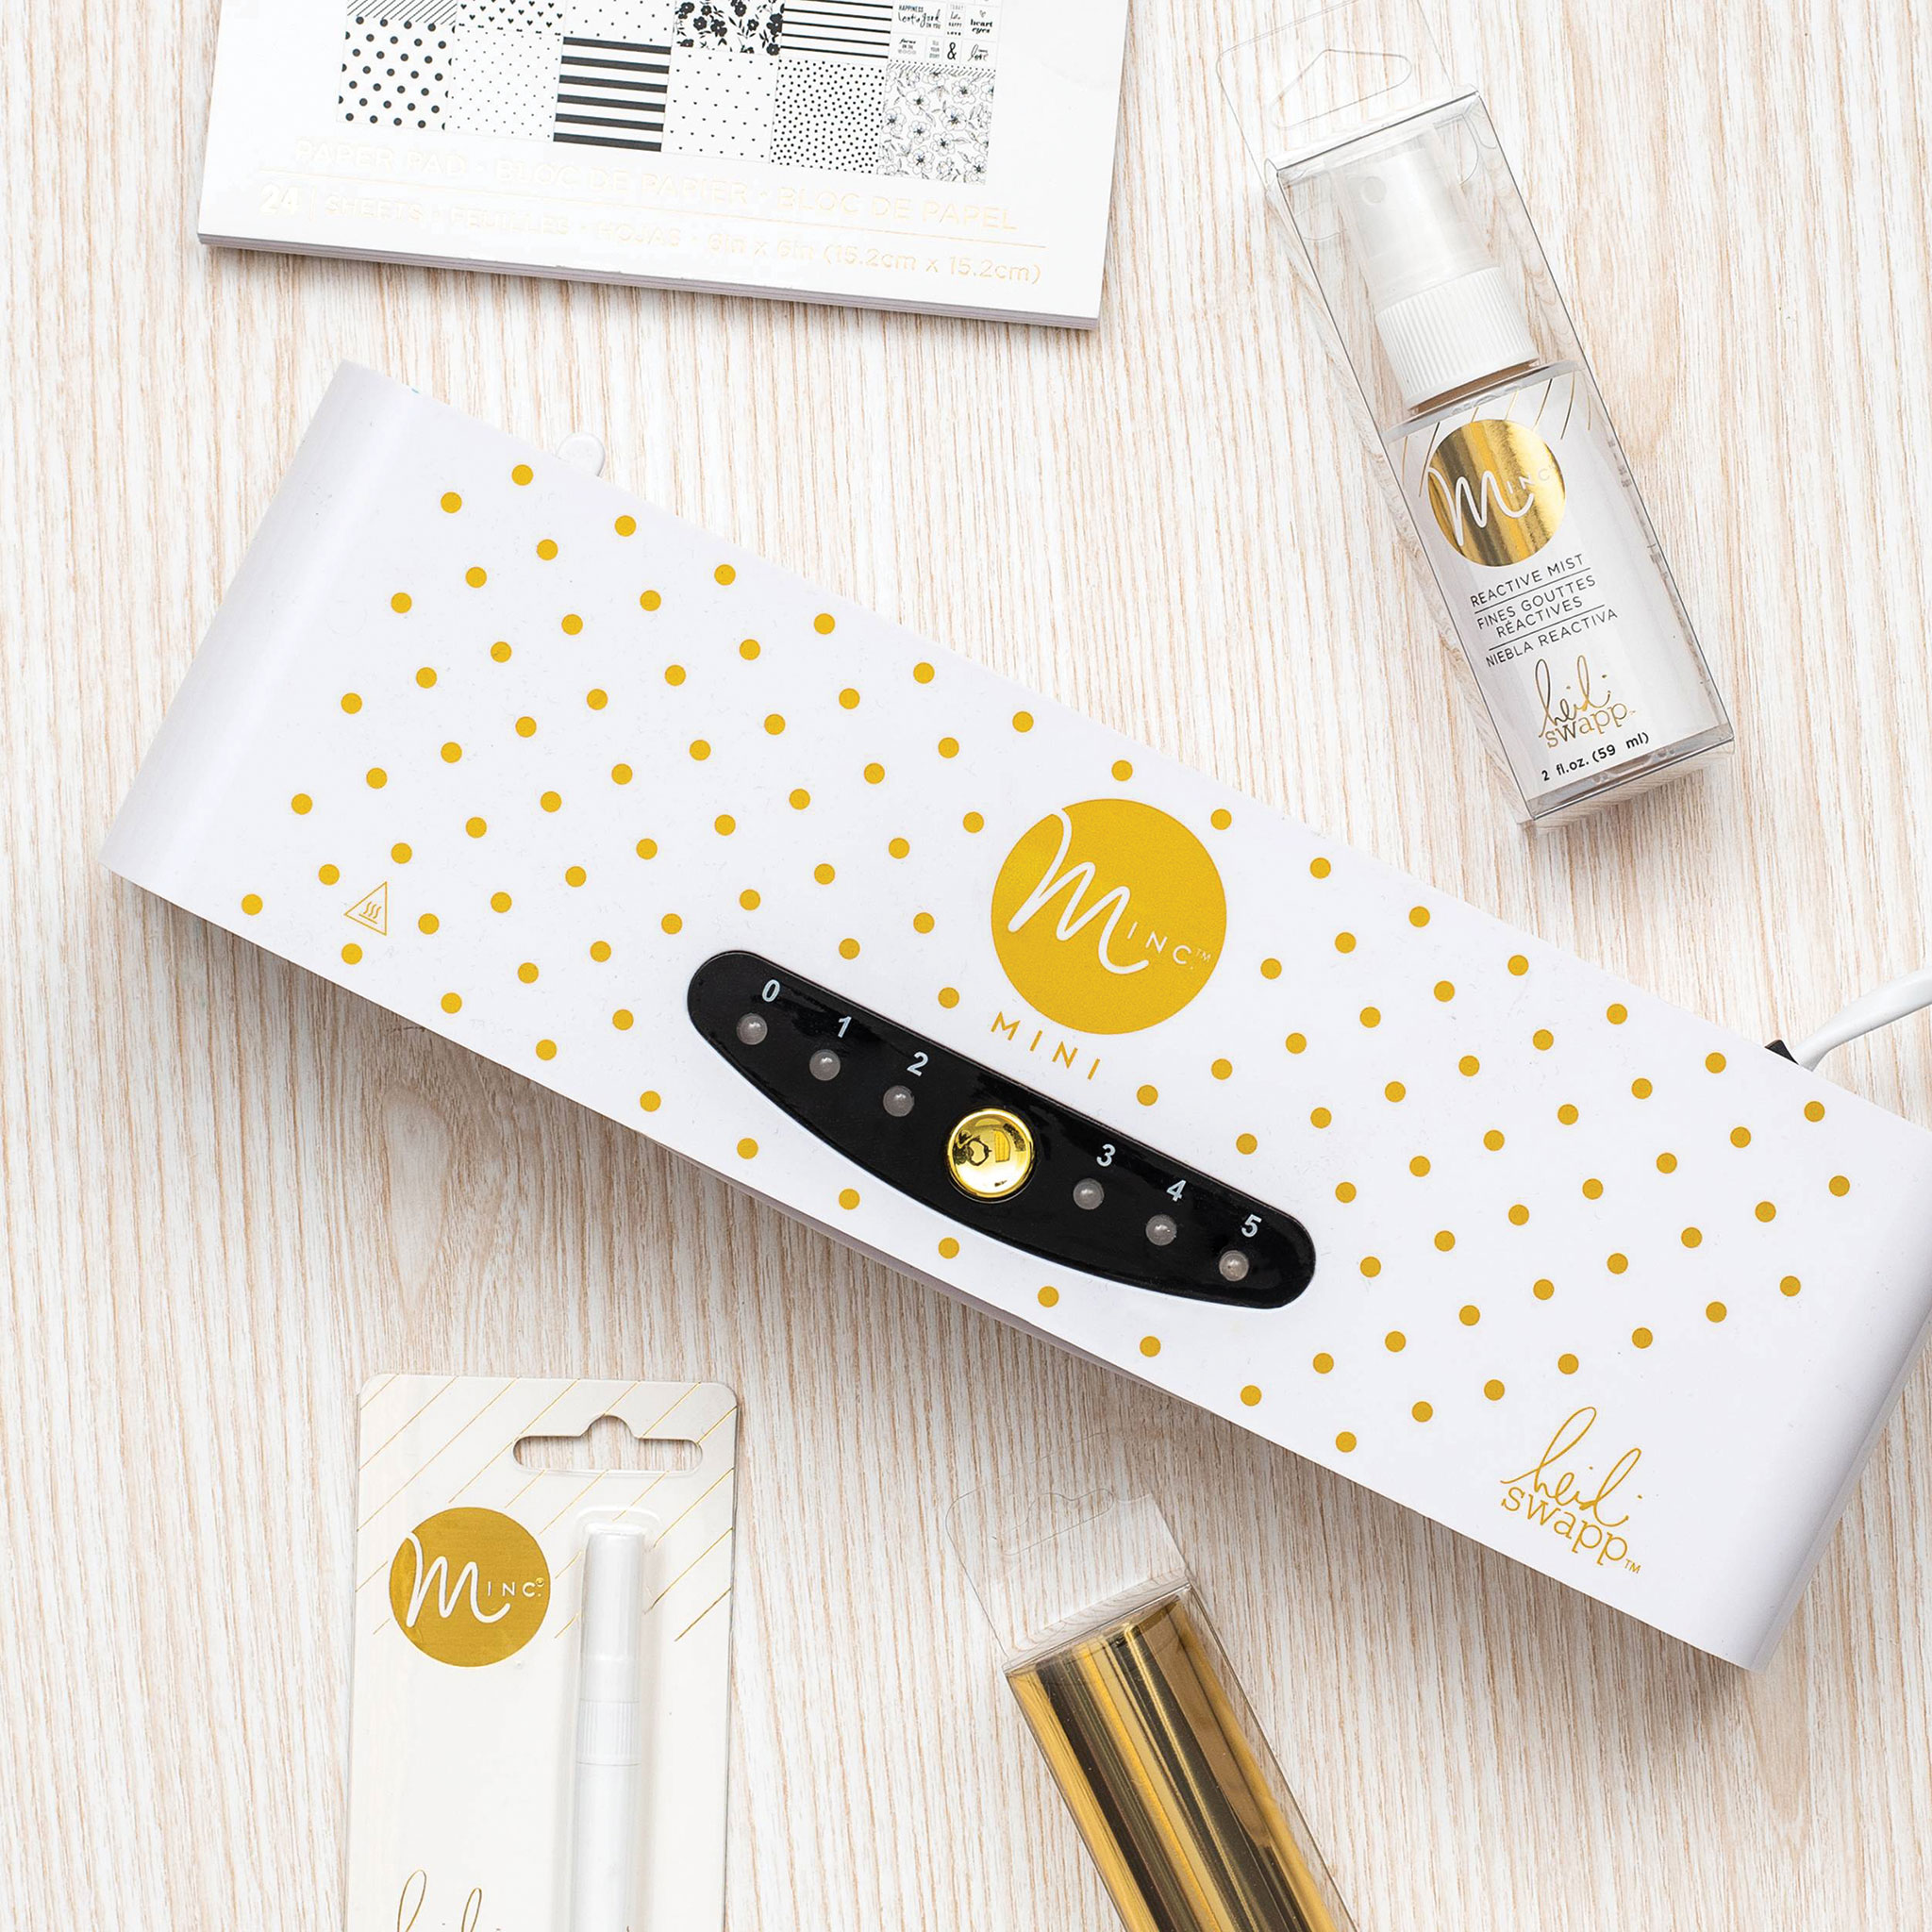 review of the Minc Foil Applicator from Heidi Swapp - how to use